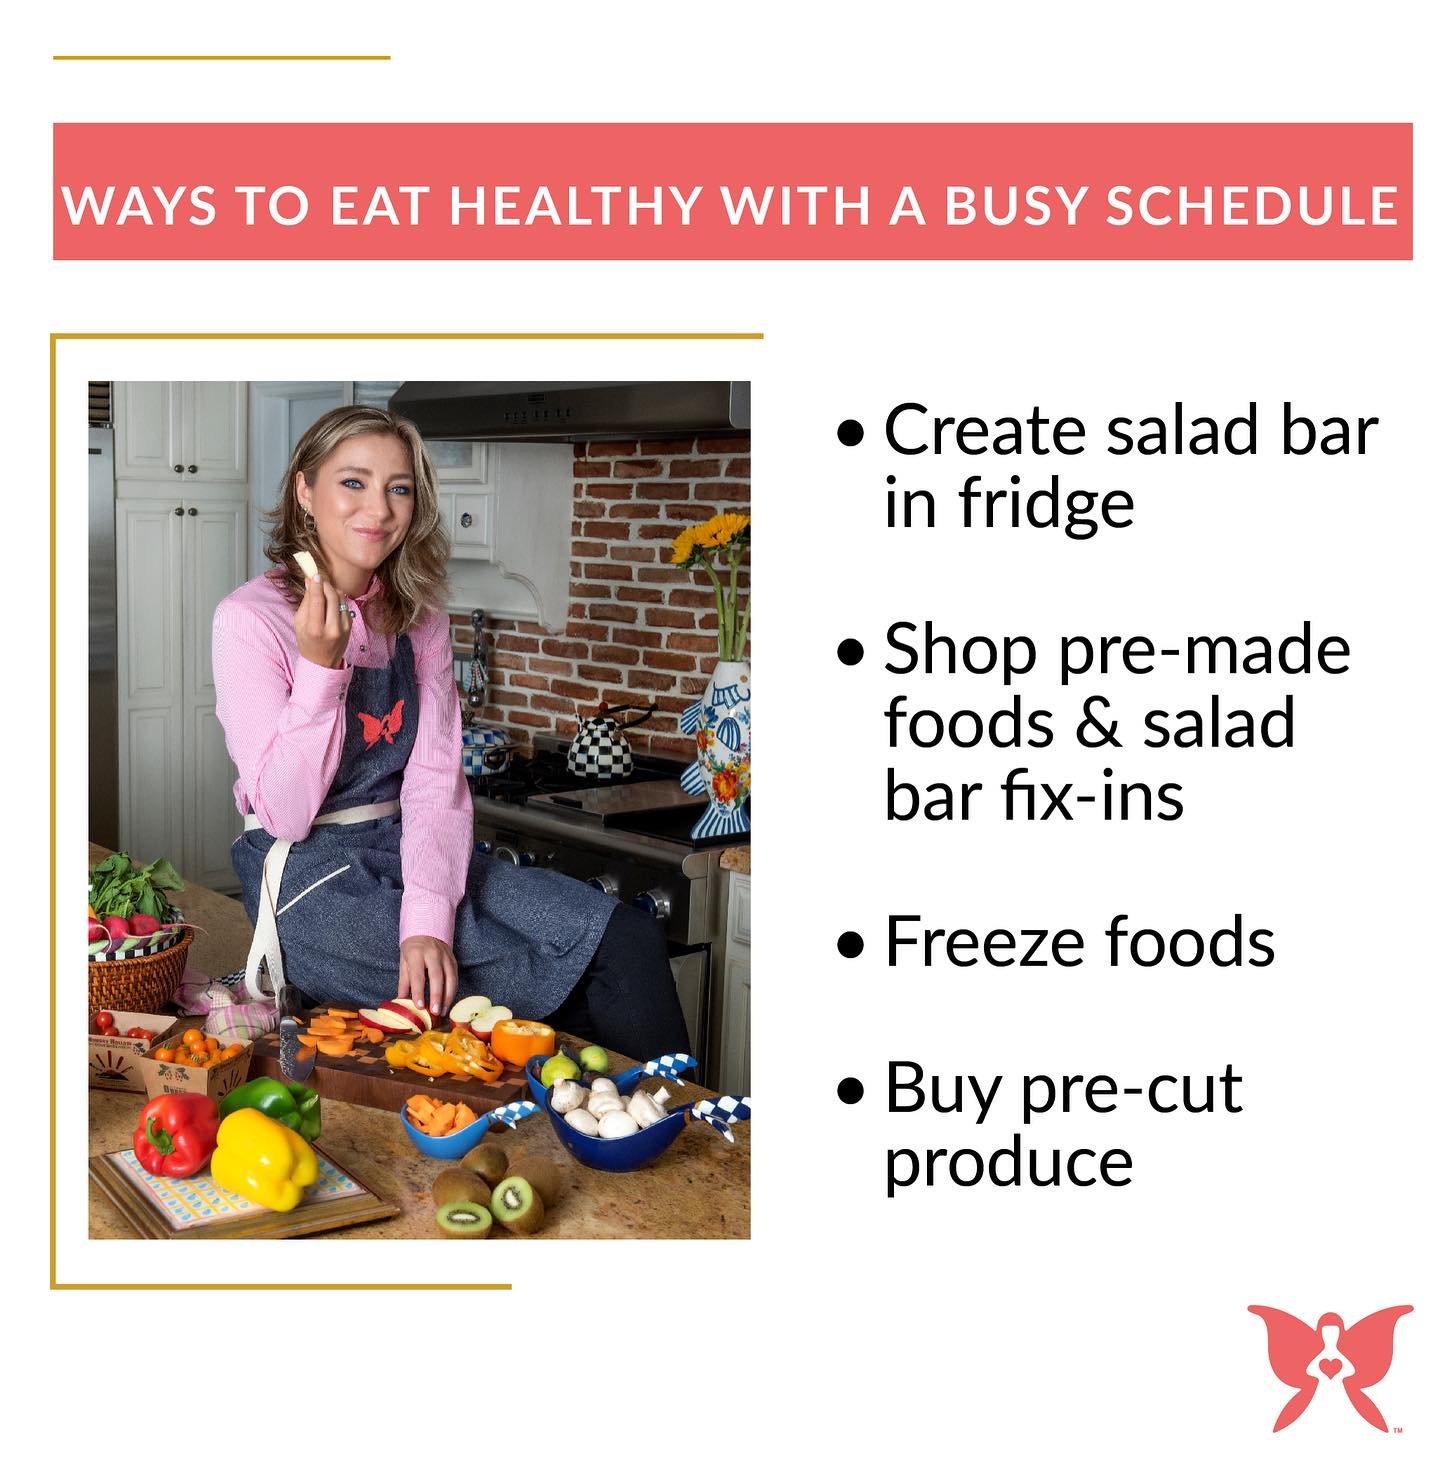 It can be tricky eating healthy with a busy schedule, so here are a few tips to help you plan ahead and avoid the diet downfall:

✅Create a salad bar in your fridge: Having fix-ins readily available is the key to throwing together a nutrient-dense me